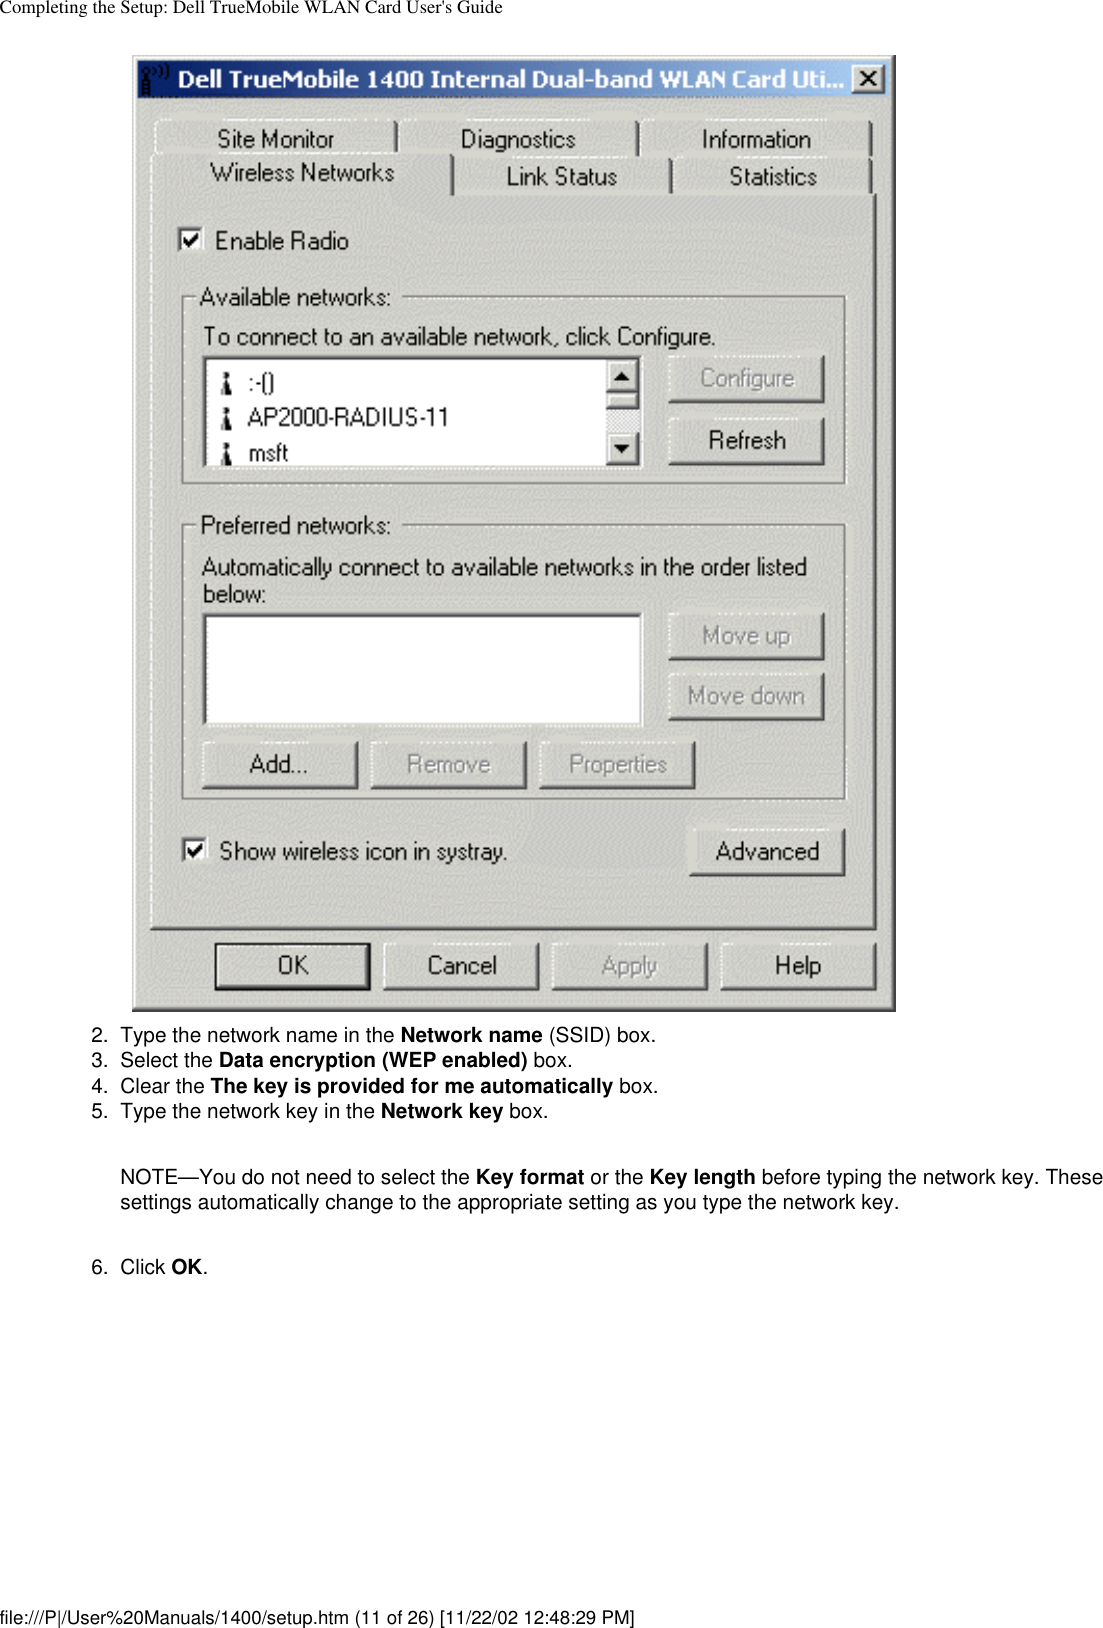 Completing the Setup: Dell TrueMobile WLAN Card User&apos;s Guide2.  Type the network name in the Network name (SSID) box.3.  Select the Data encryption (WEP enabled) box.4.  Clear the The key is provided for me automatically box.5.  Type the network key in the Network key box. NOTE—You do not need to select the Key format or the Key length before typing the network key. These settings automatically change to the appropriate setting as you type the network key.6.  Click OK. file:///P|/User%20Manuals/1400/setup.htm (11 of 26) [11/22/02 12:48:29 PM]